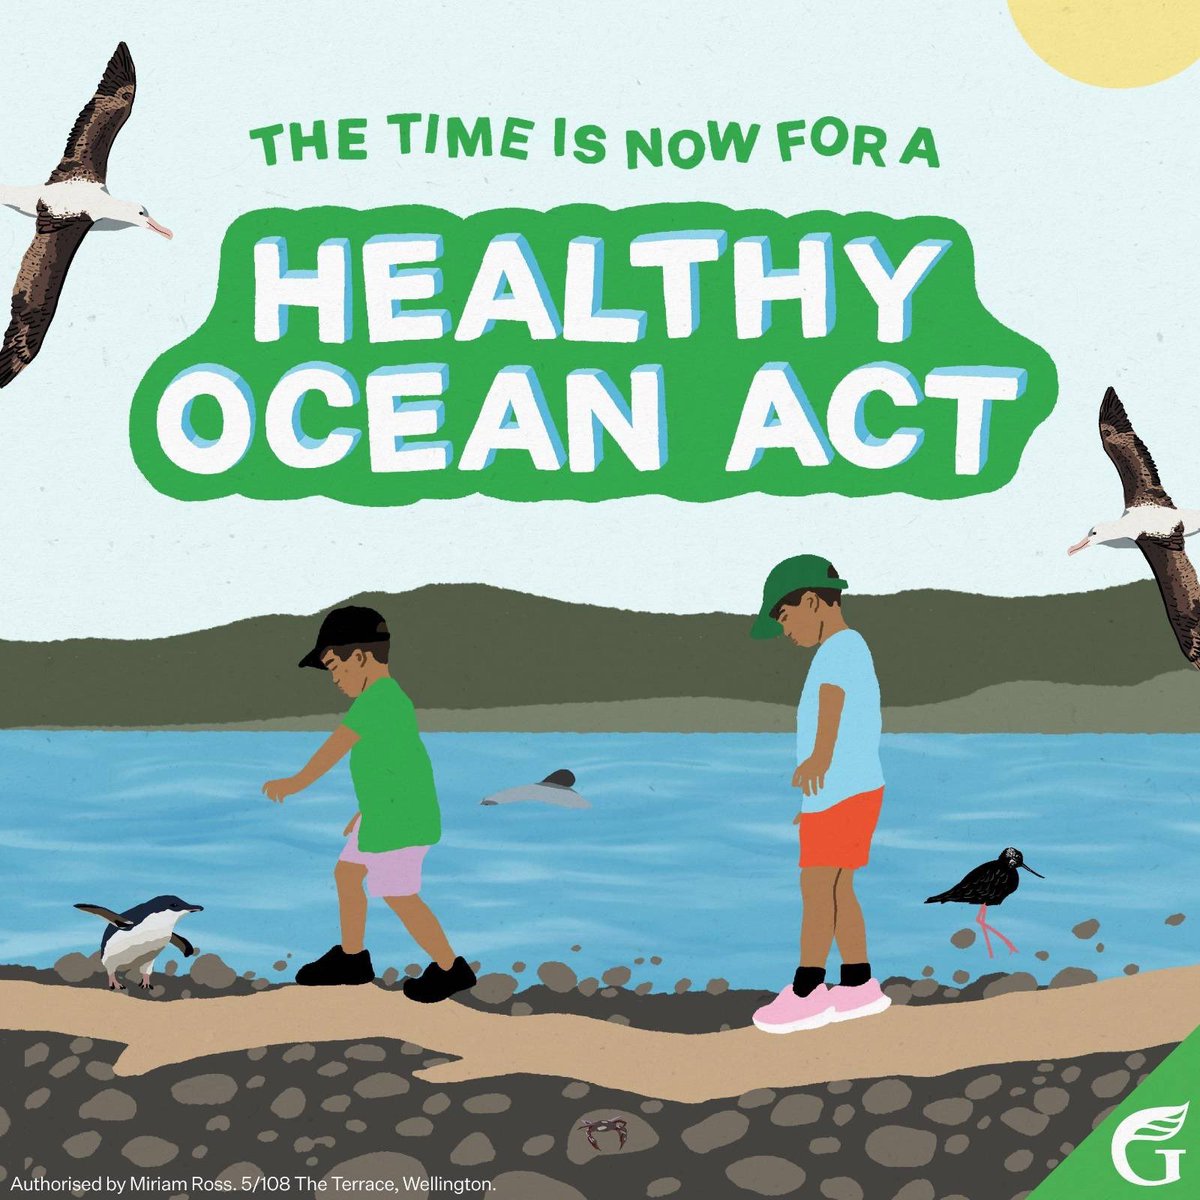 .@NZGreens and @MaramaDavidson Our commitment to ensuring ocean ecosystems thrive is matched by our commitment to tino rangatiratanga of hapū across the motu. We will weave these kaupapa together in a new framework for marine protection. #TheTimeIsNow